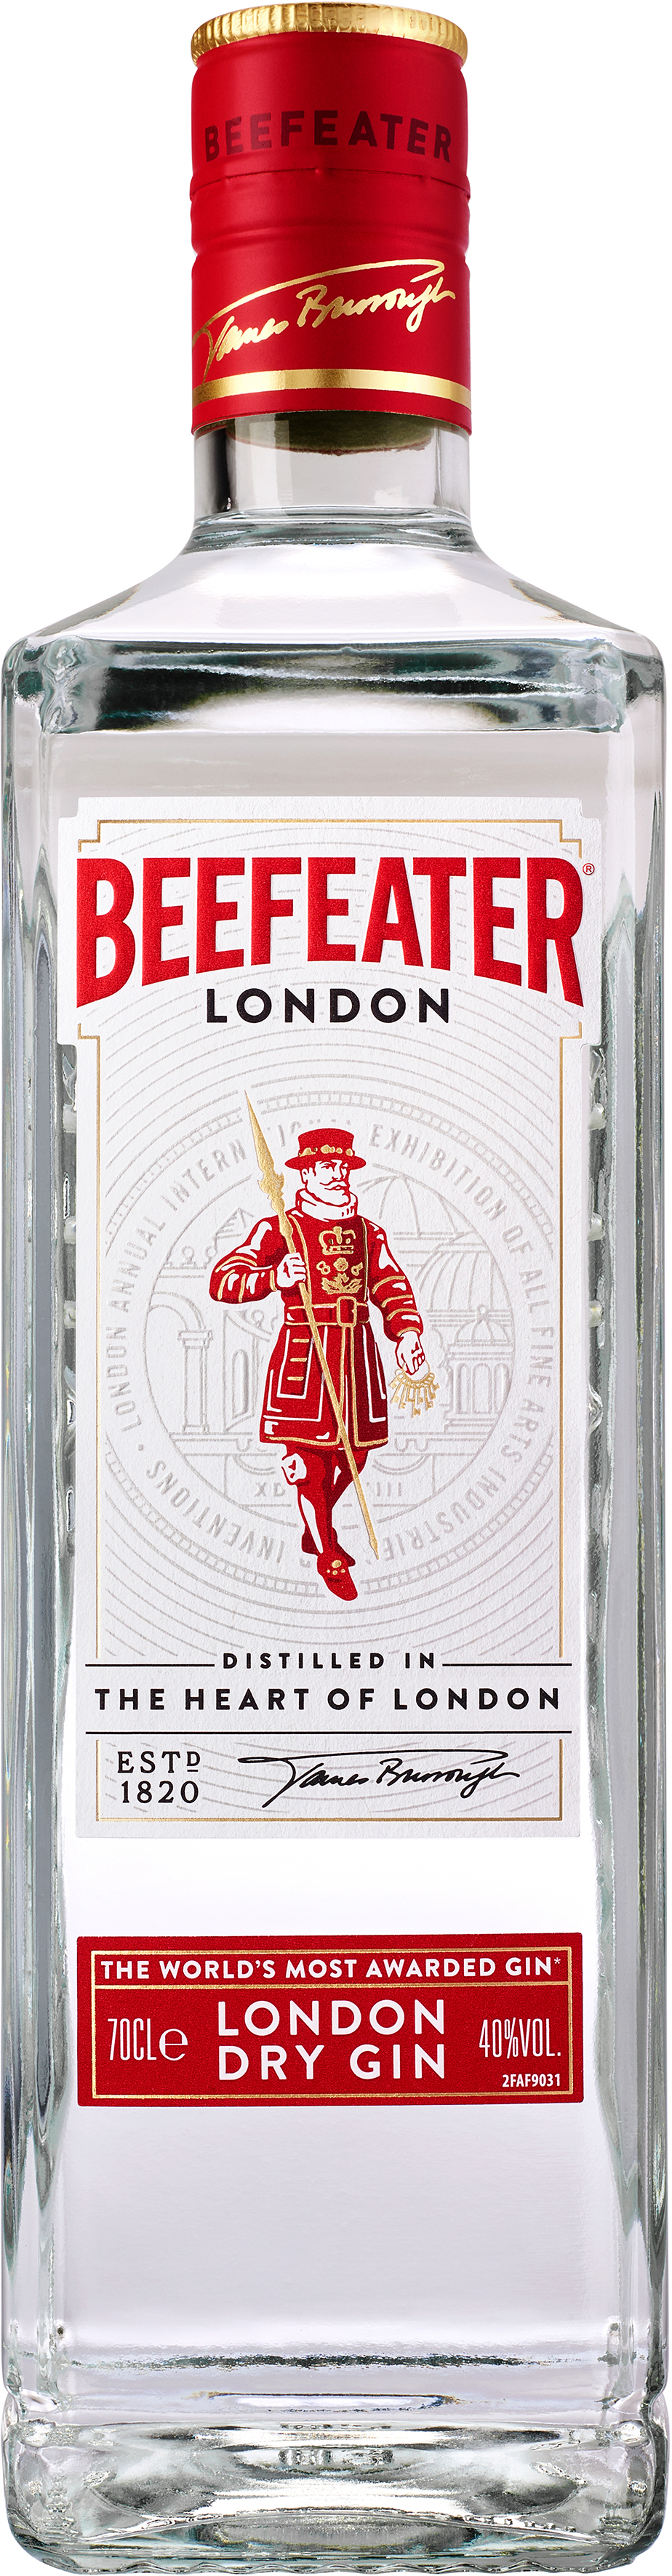 Beefeater London Dry Gin 0,7L (40% Vol)- [Enthält Sulfite]